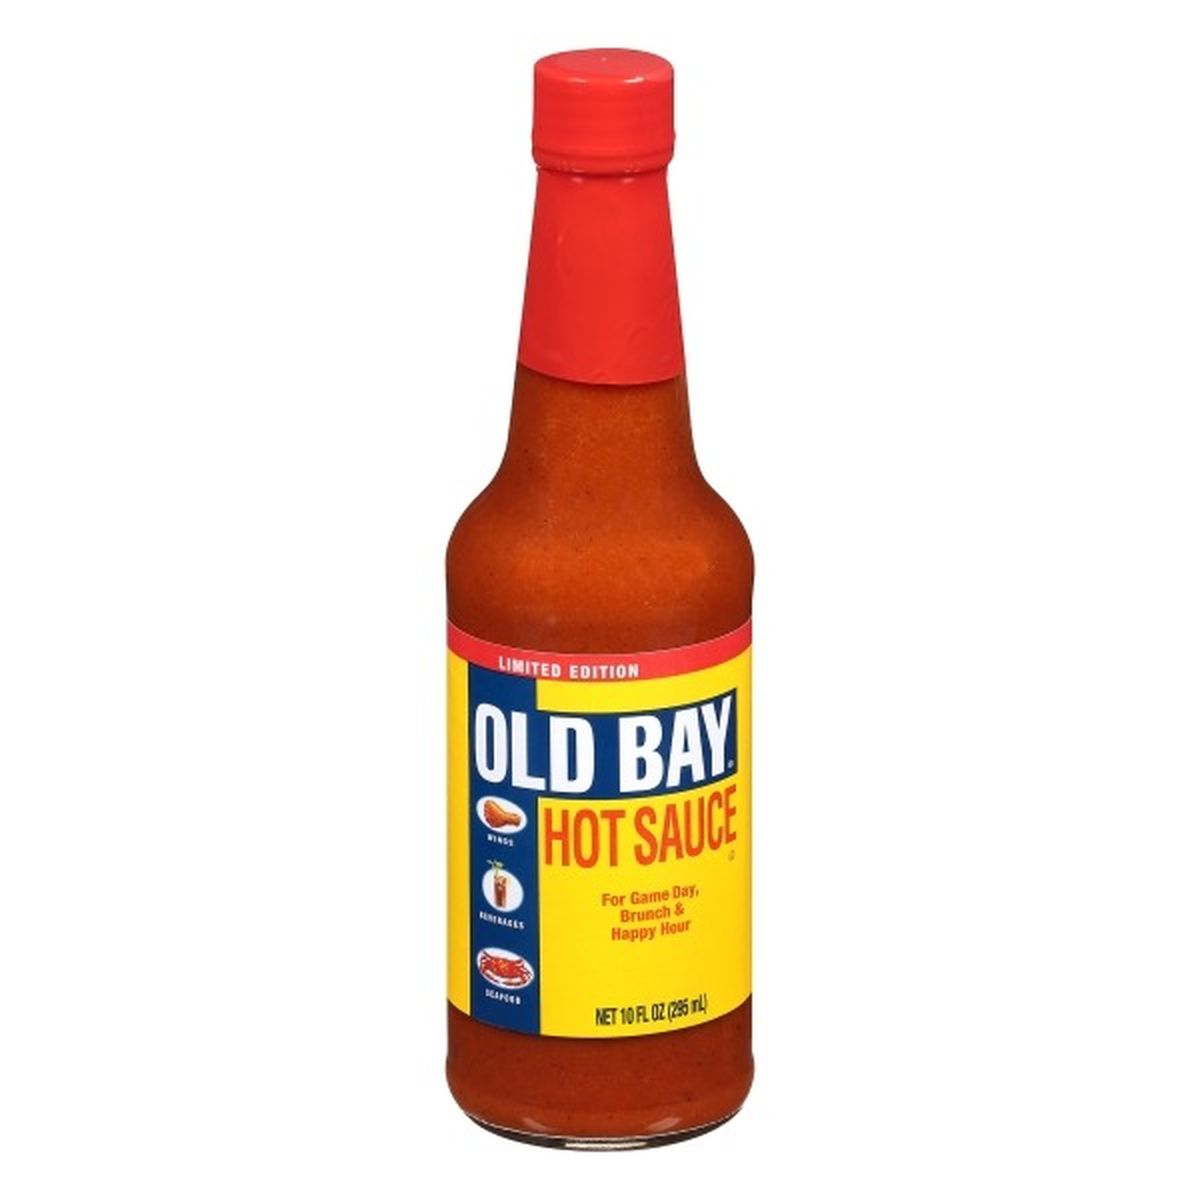 Calories in Old Bays Hot Sauce